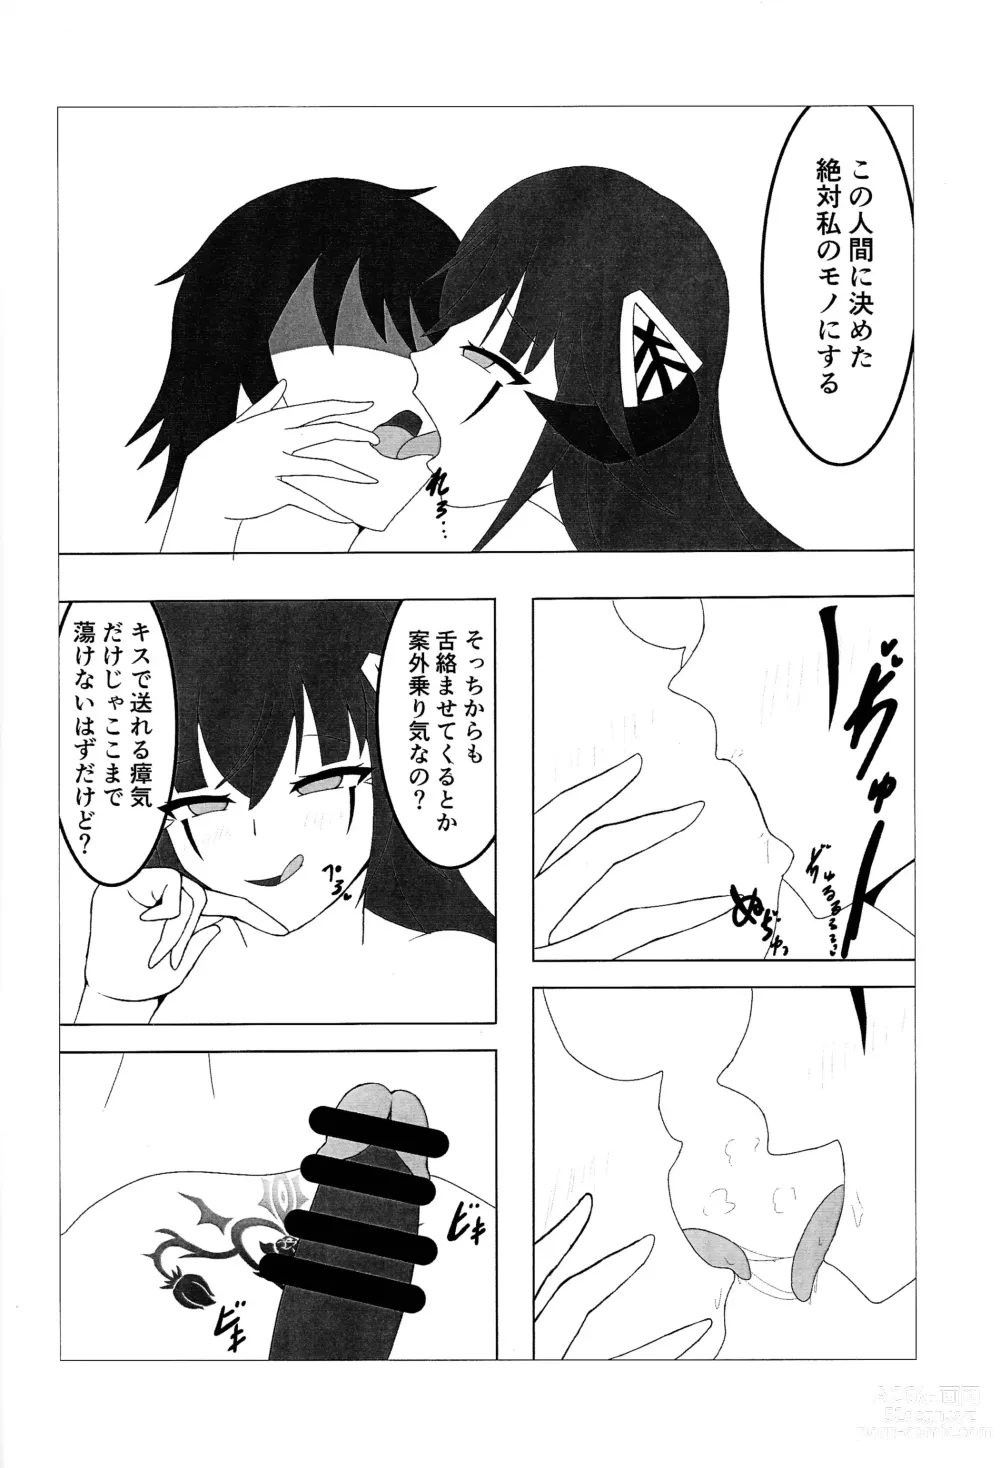 Page 9 of doujinshi FLAMES OF THIS AFFECTION